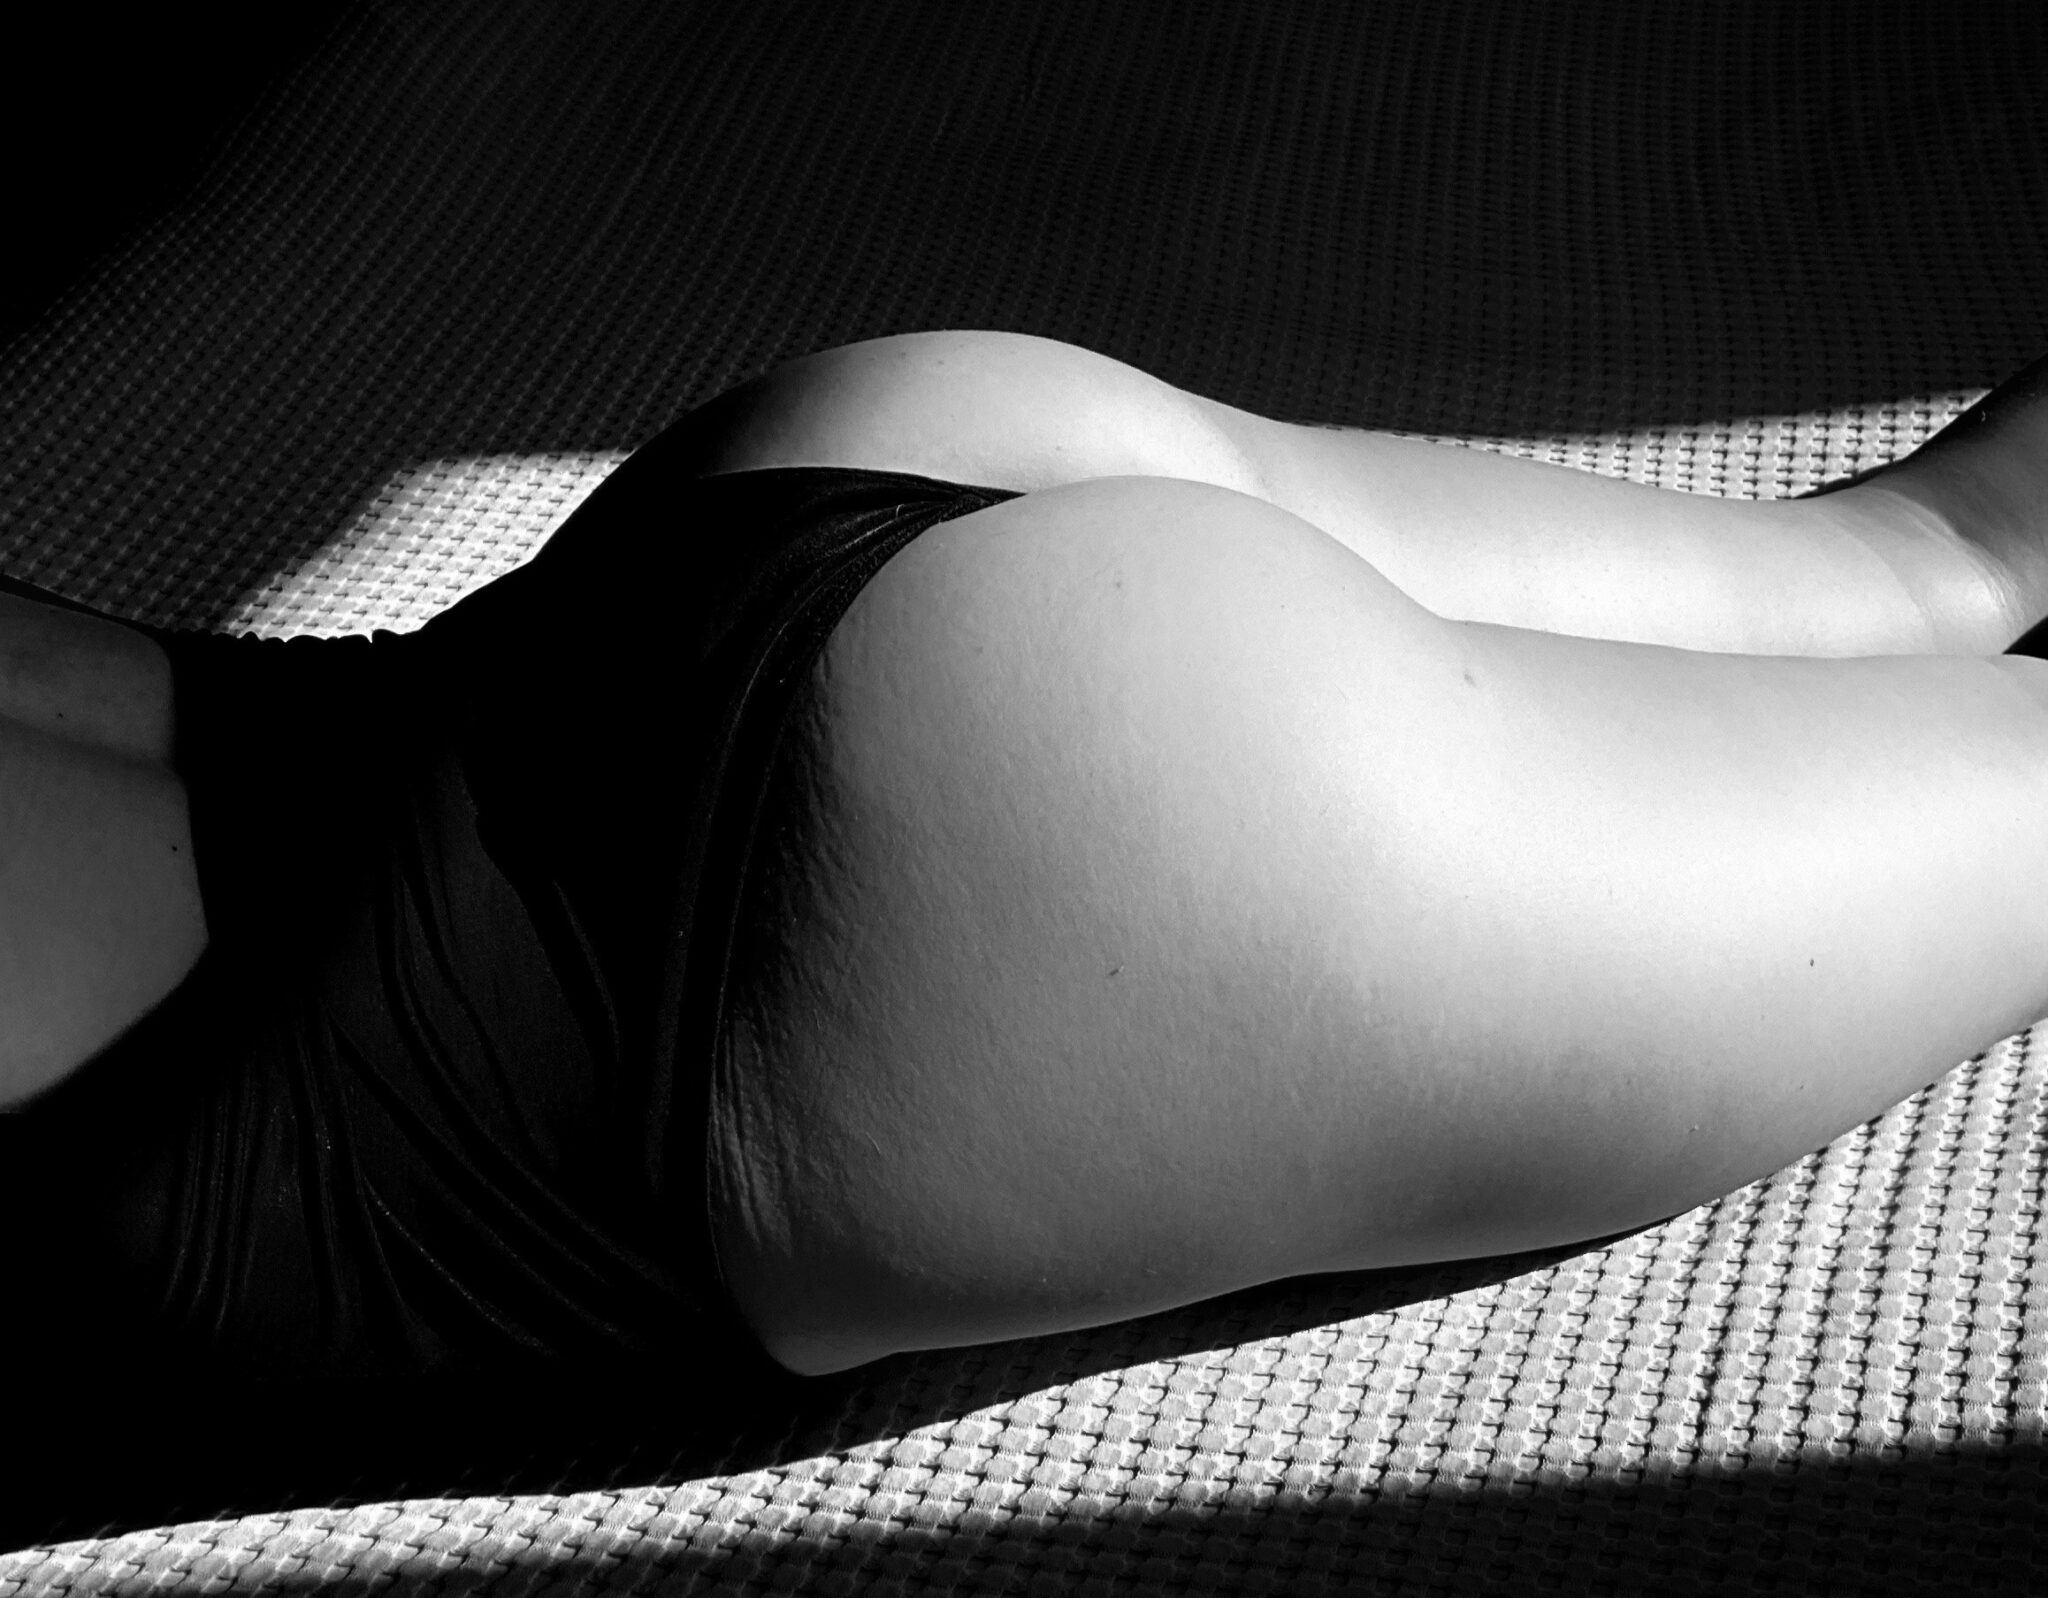 A woman's naked legs and butt stretching out across a sofa in black and white.